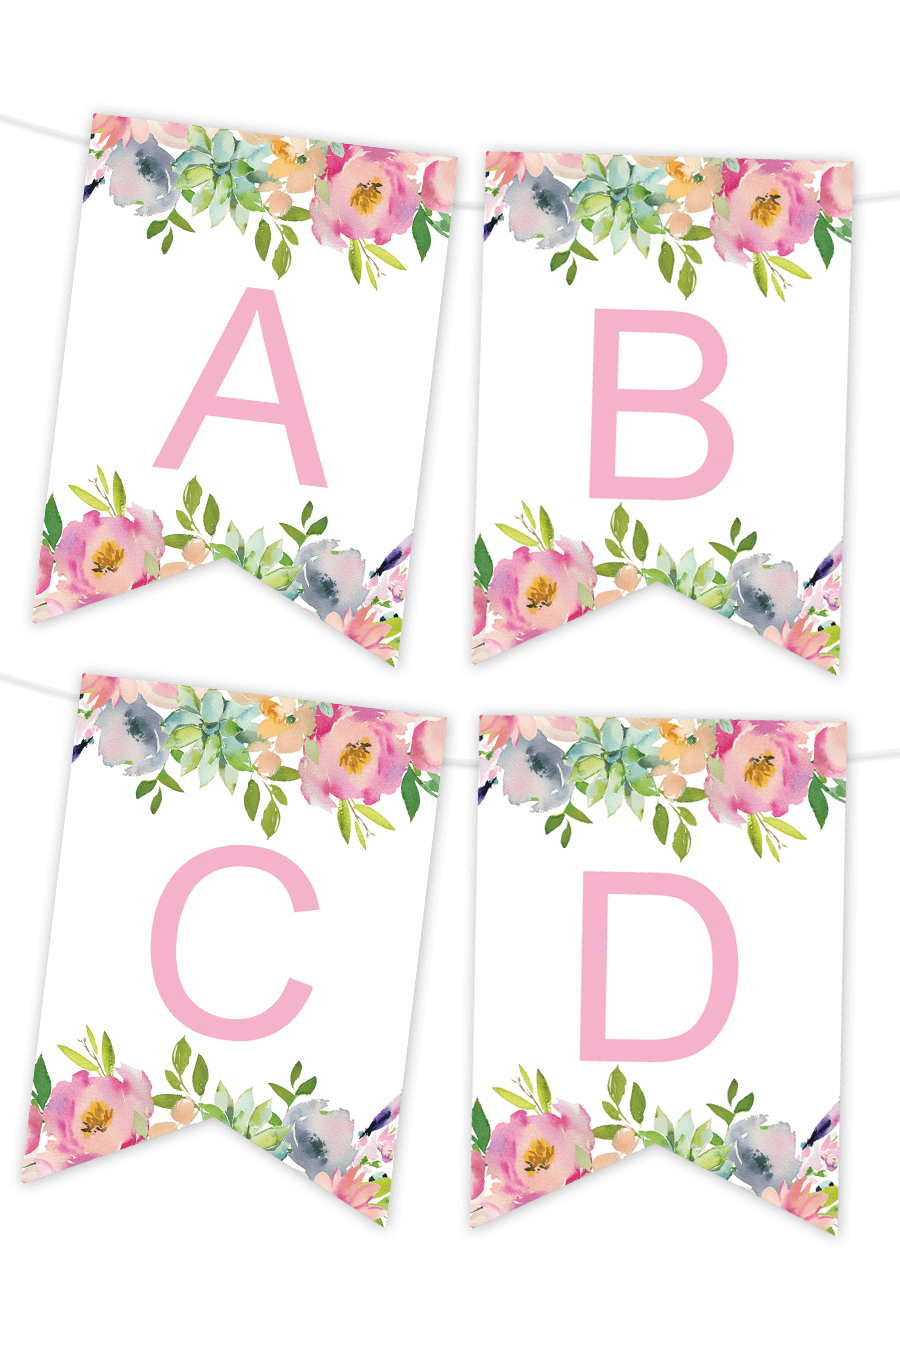 Impertinent Free Printable Banner Templates | Kenzi's Blog In Printable Banners Templates Free